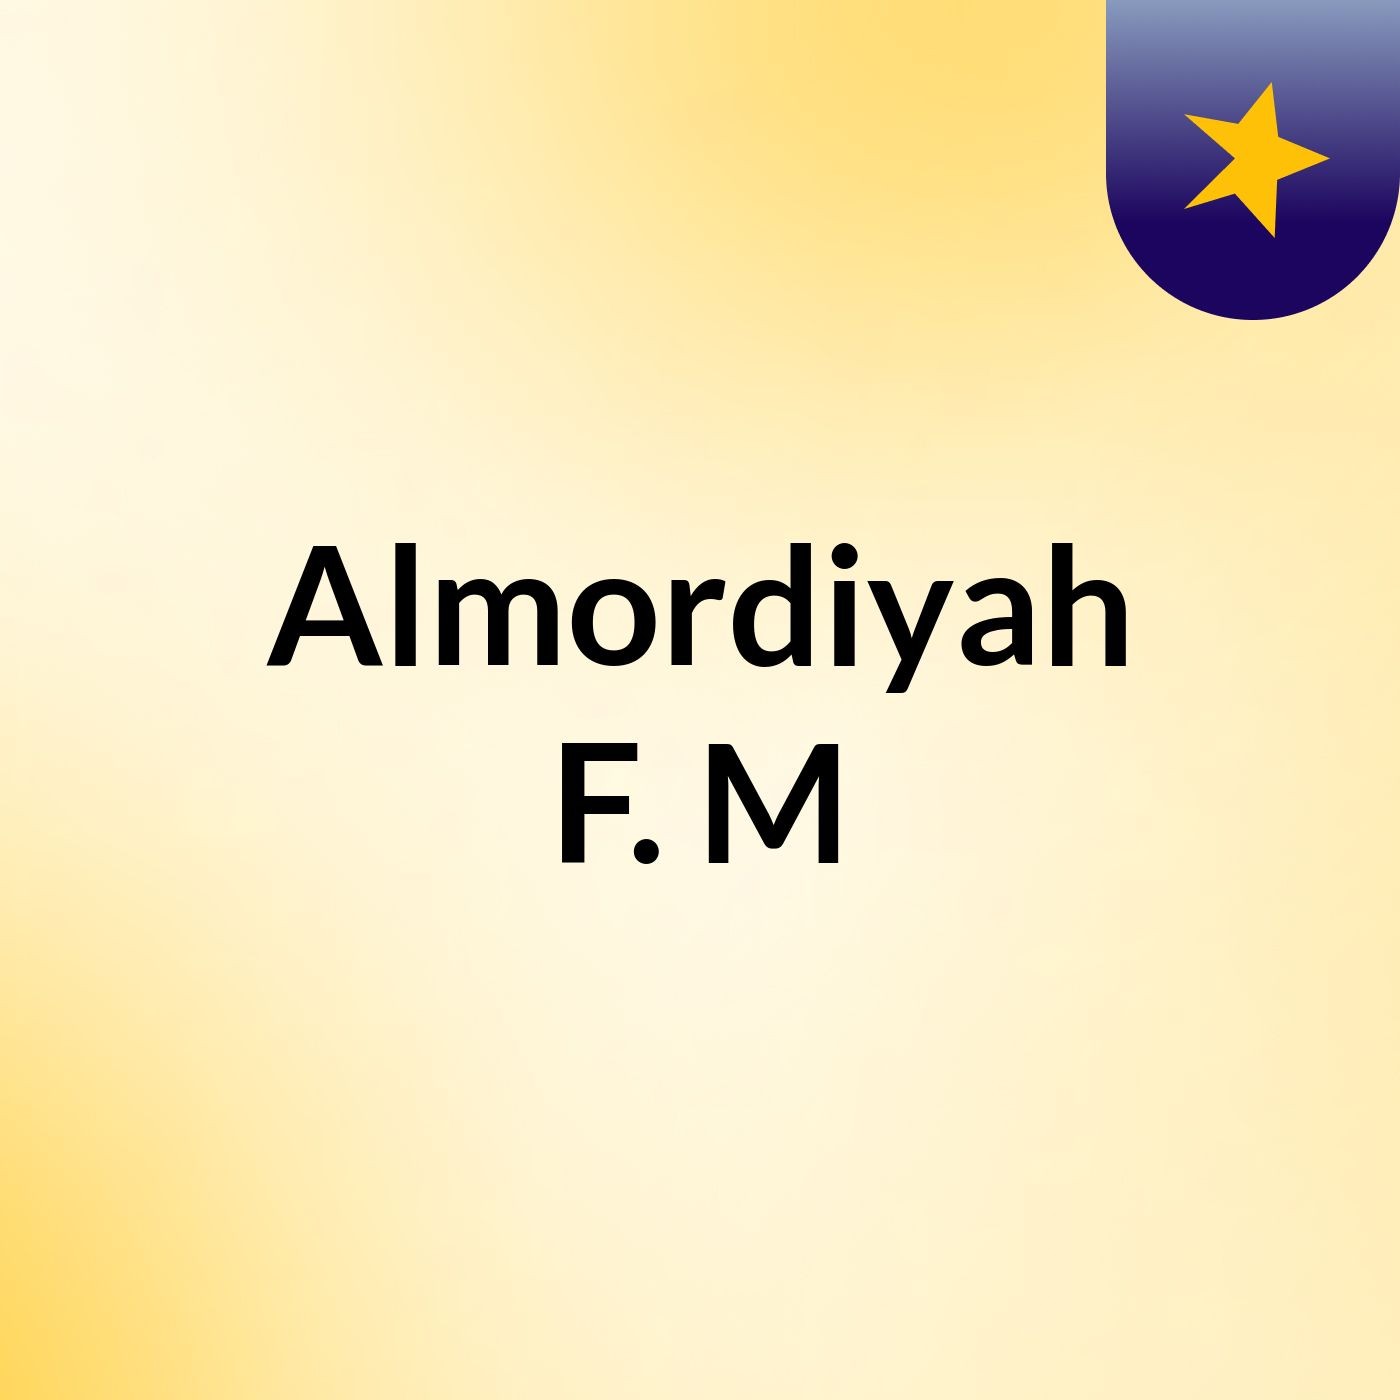 My very first episode with Spreaker Studio Introduction Of Almordiyah